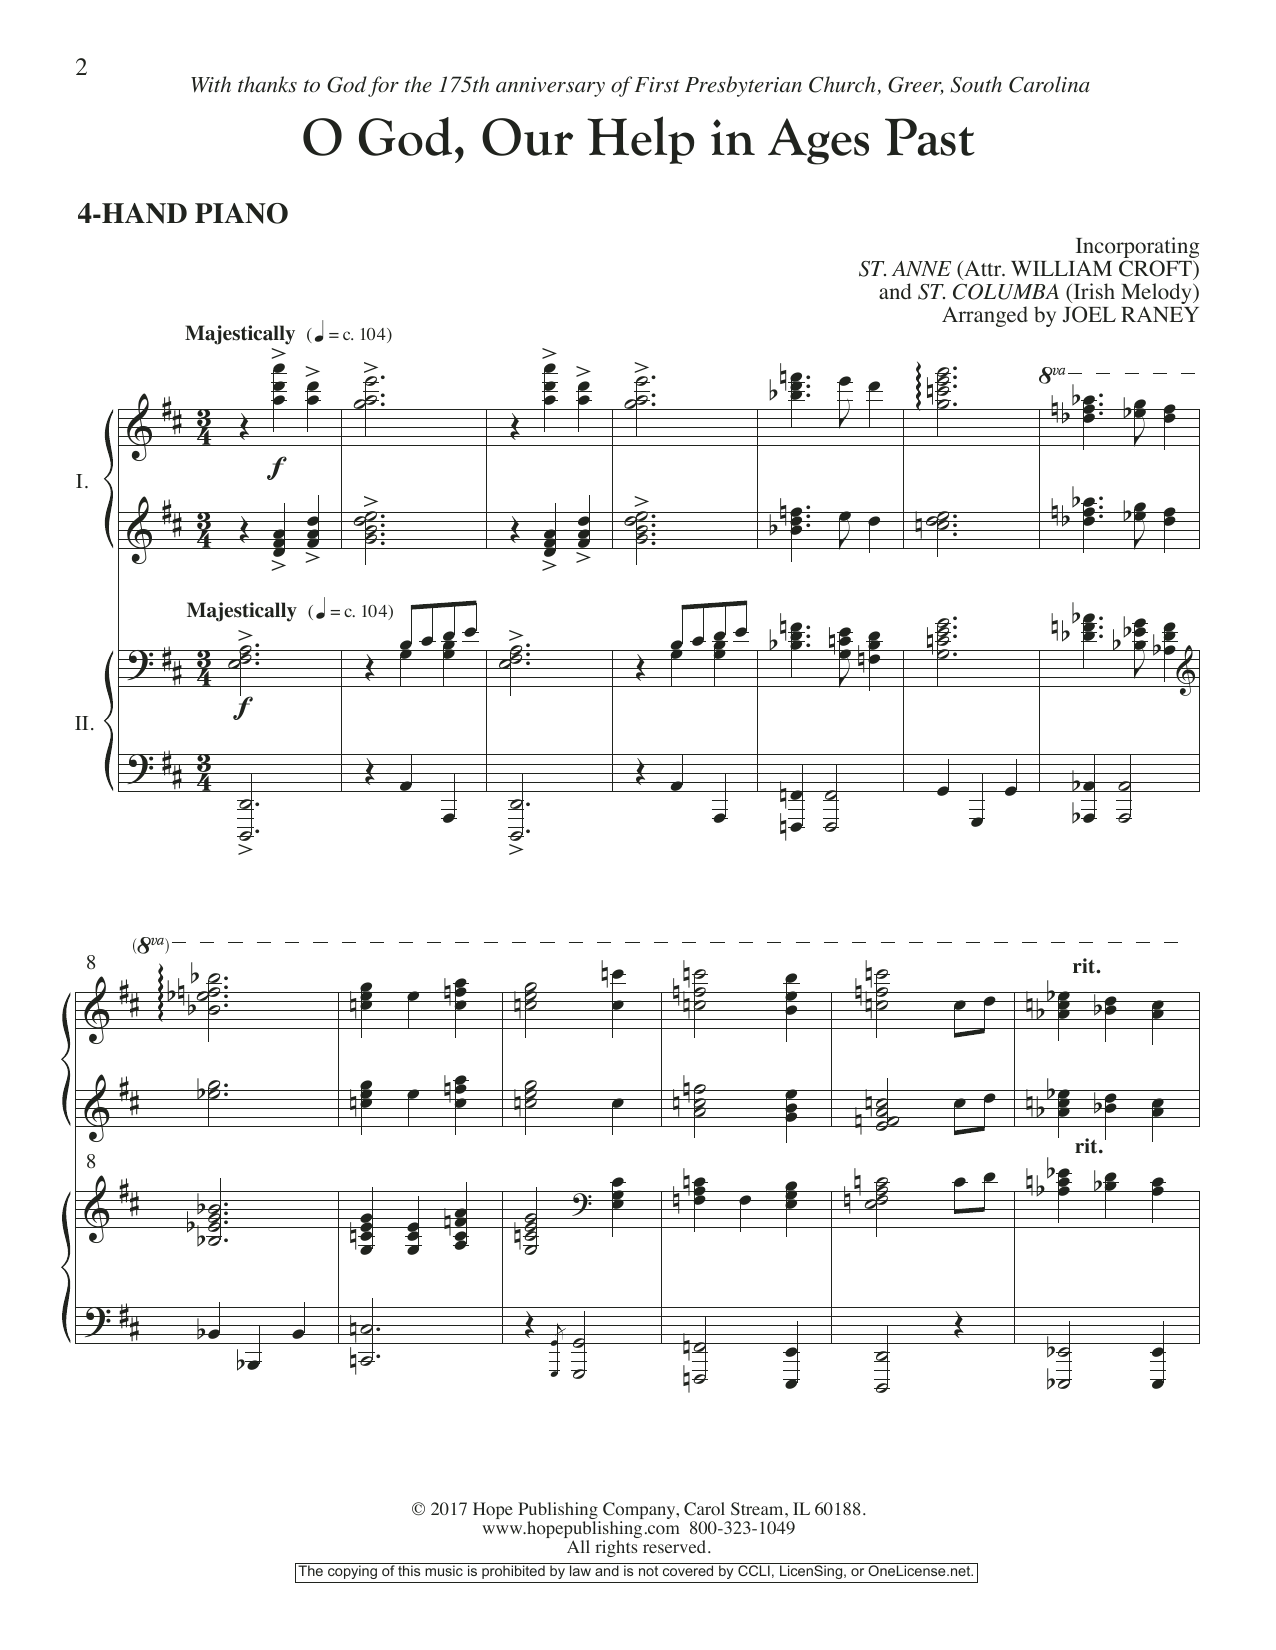 Download Joel Raney O God, Our Help in Ages Past - Piano Ac Sheet Music